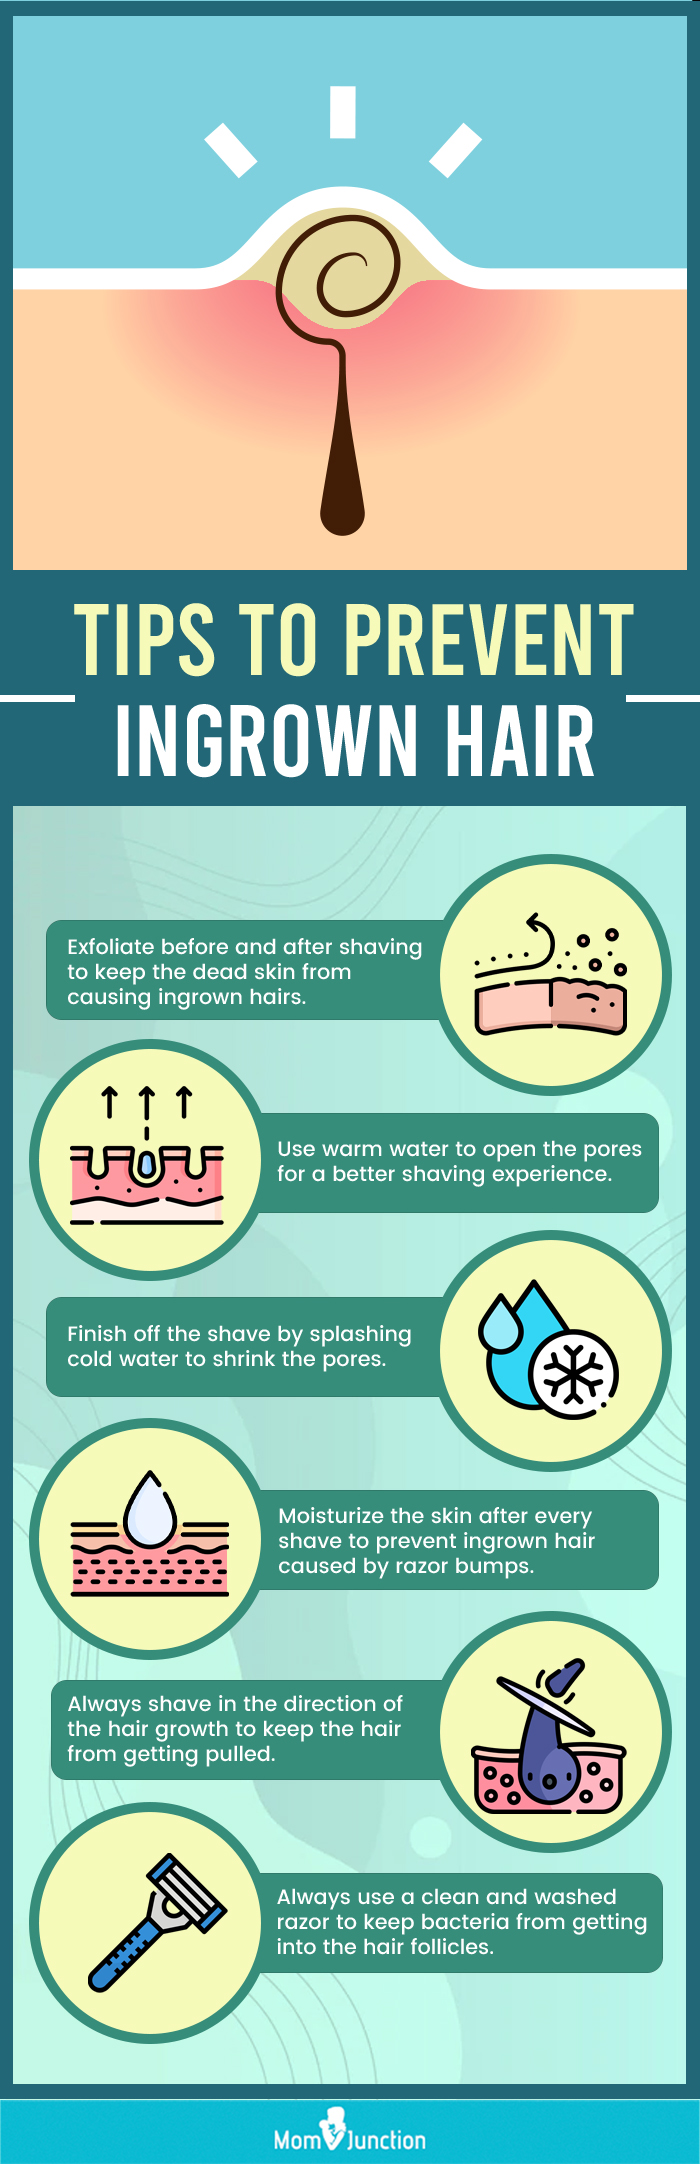 Tips To Prevent Ingrown Hair (infographic)